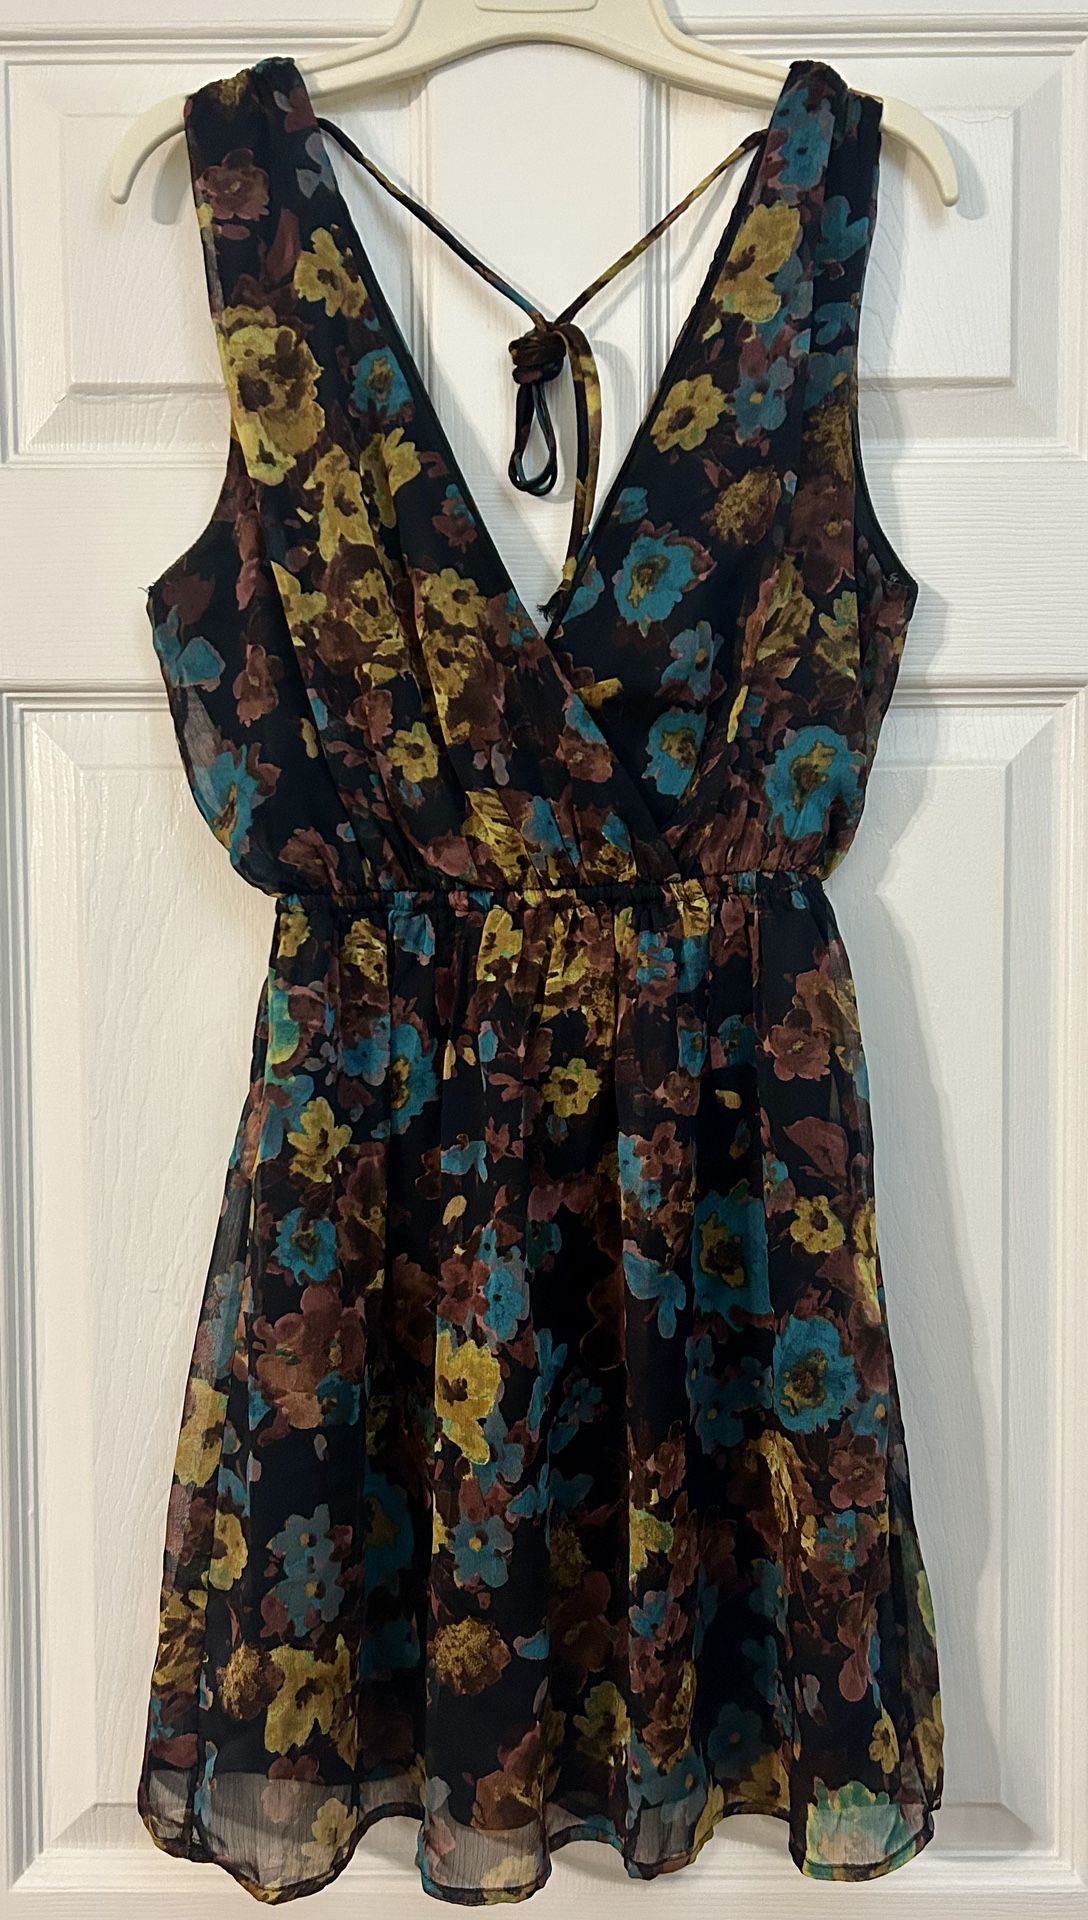 Forever 21 Summer Dress Fit and Flare Floral Flowers Blue Yellow Brown Red Pink Size Petite Small